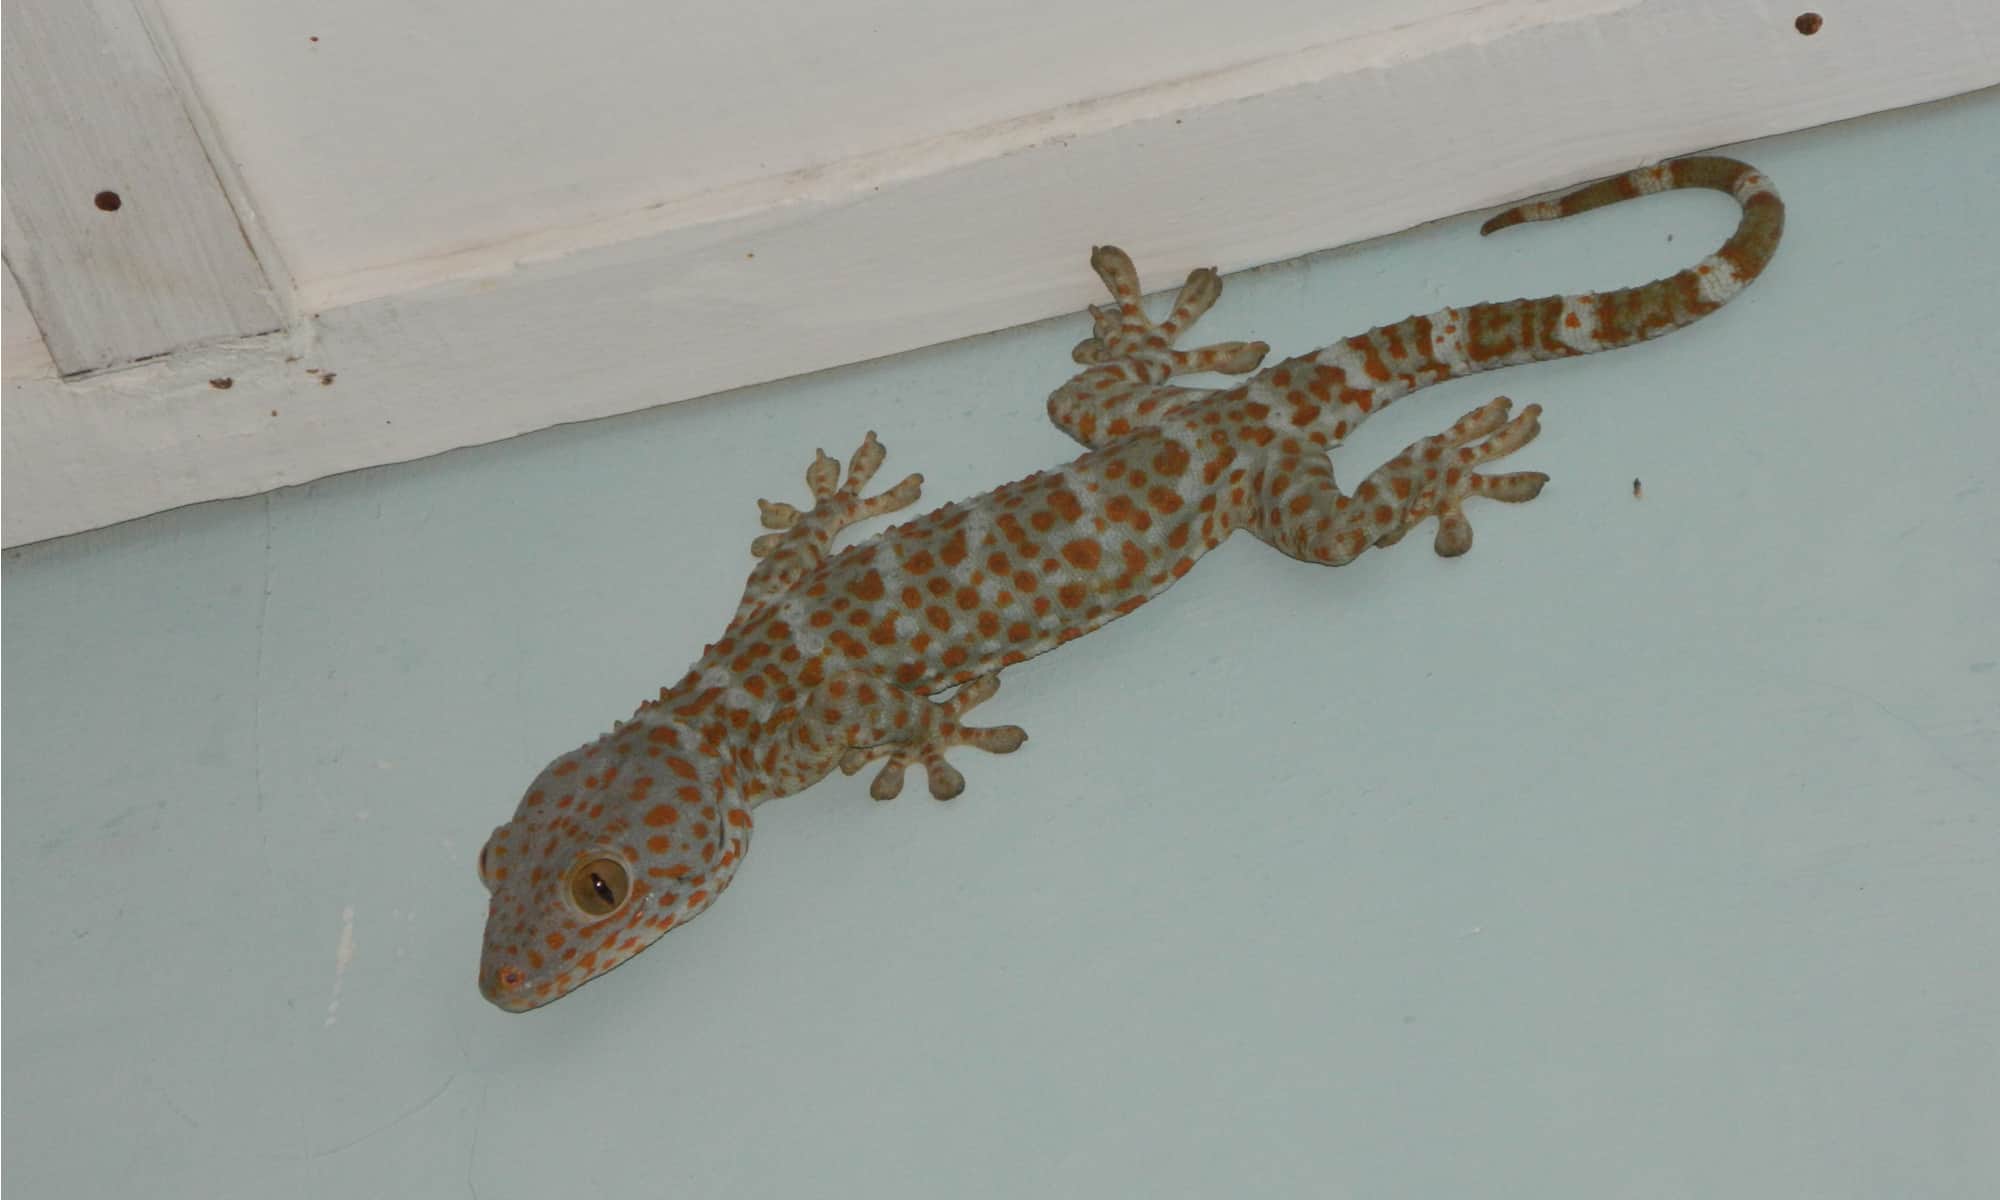 types of house lizards